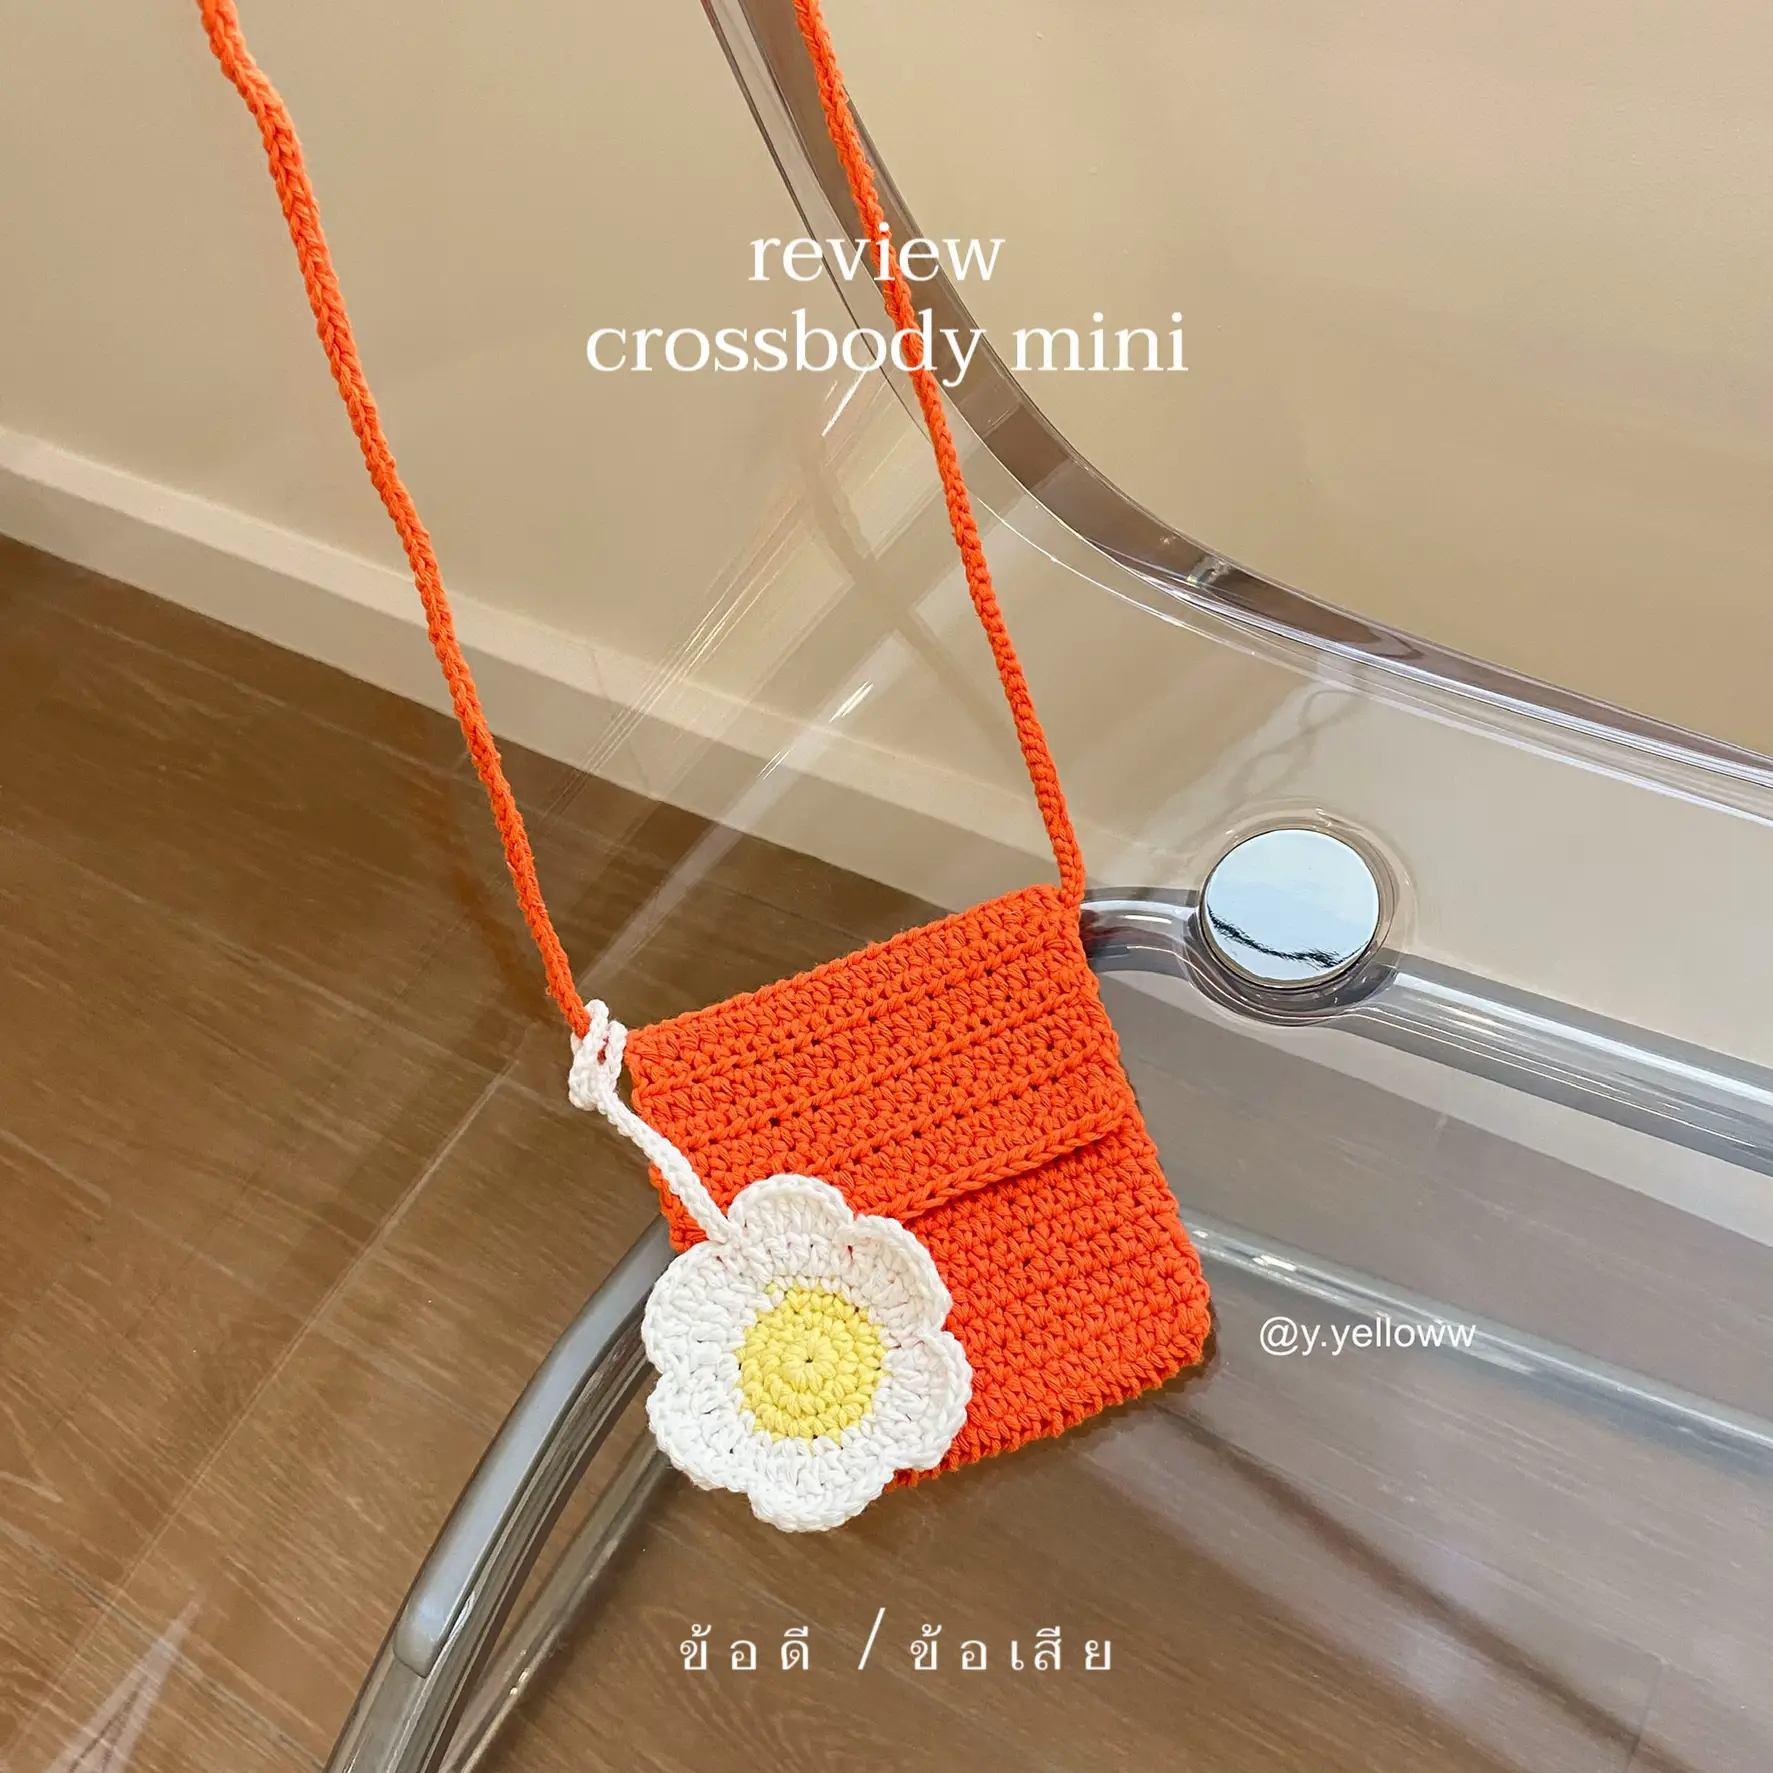 Review crossbody mini pros / cons👀🛼, Gallery posted by ε nessei ♡